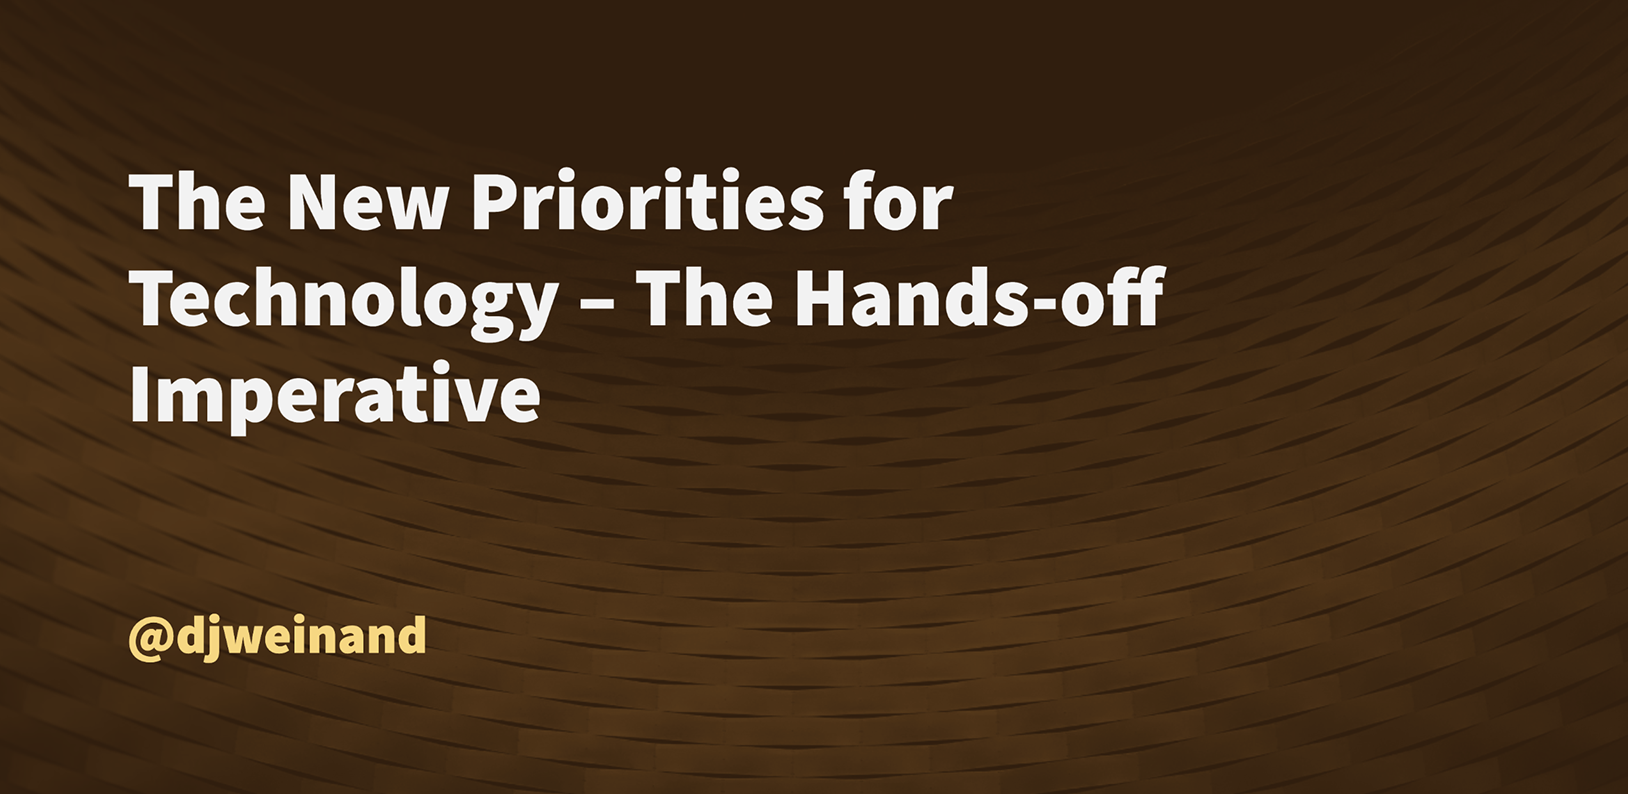 The New Priorities for Technology – The Hands-off Imperative